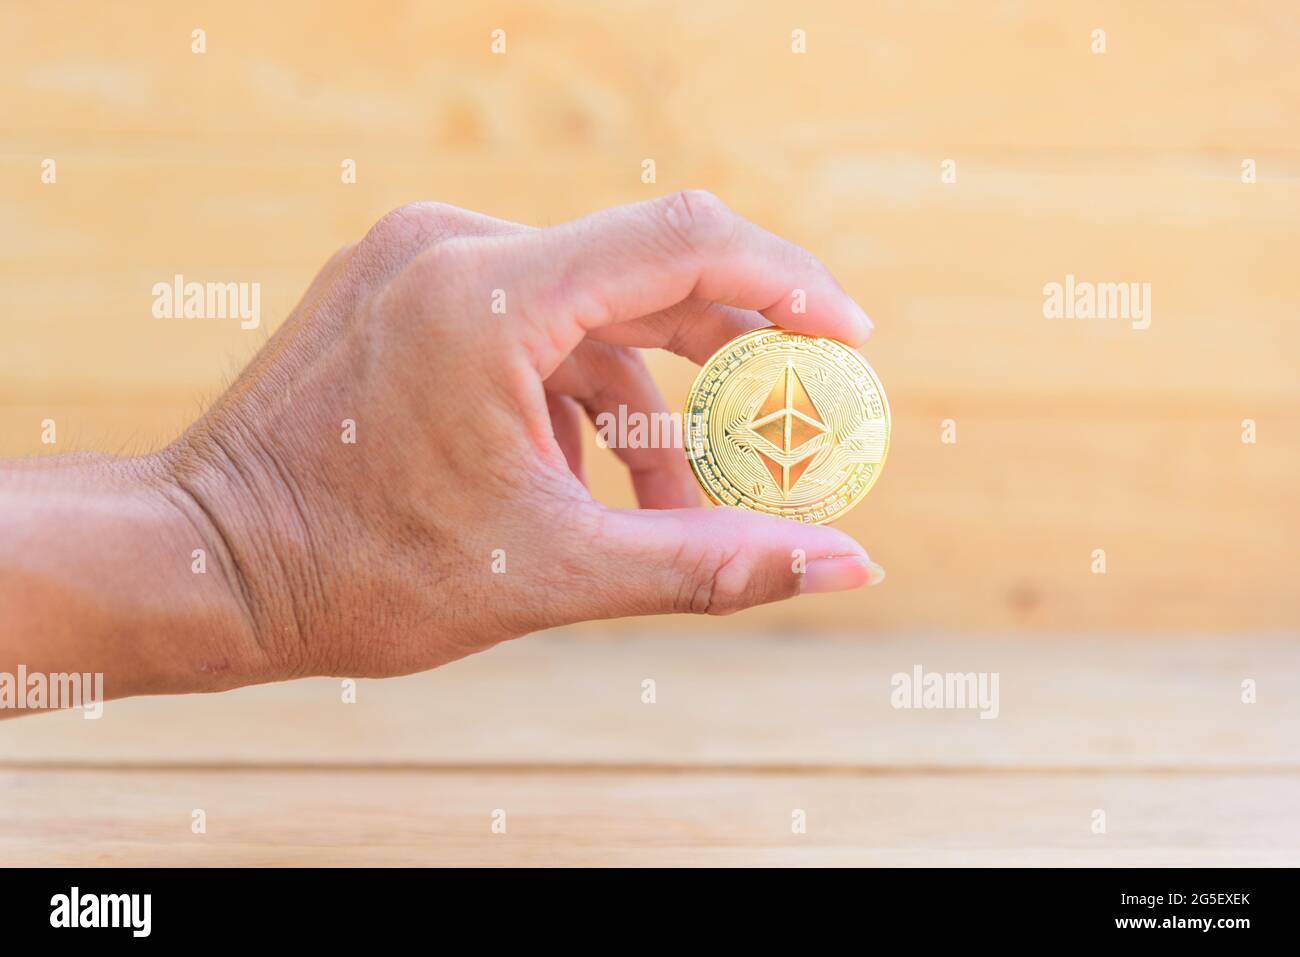 The man show ethereum coin cryptocurrency in his hand Stock Photo